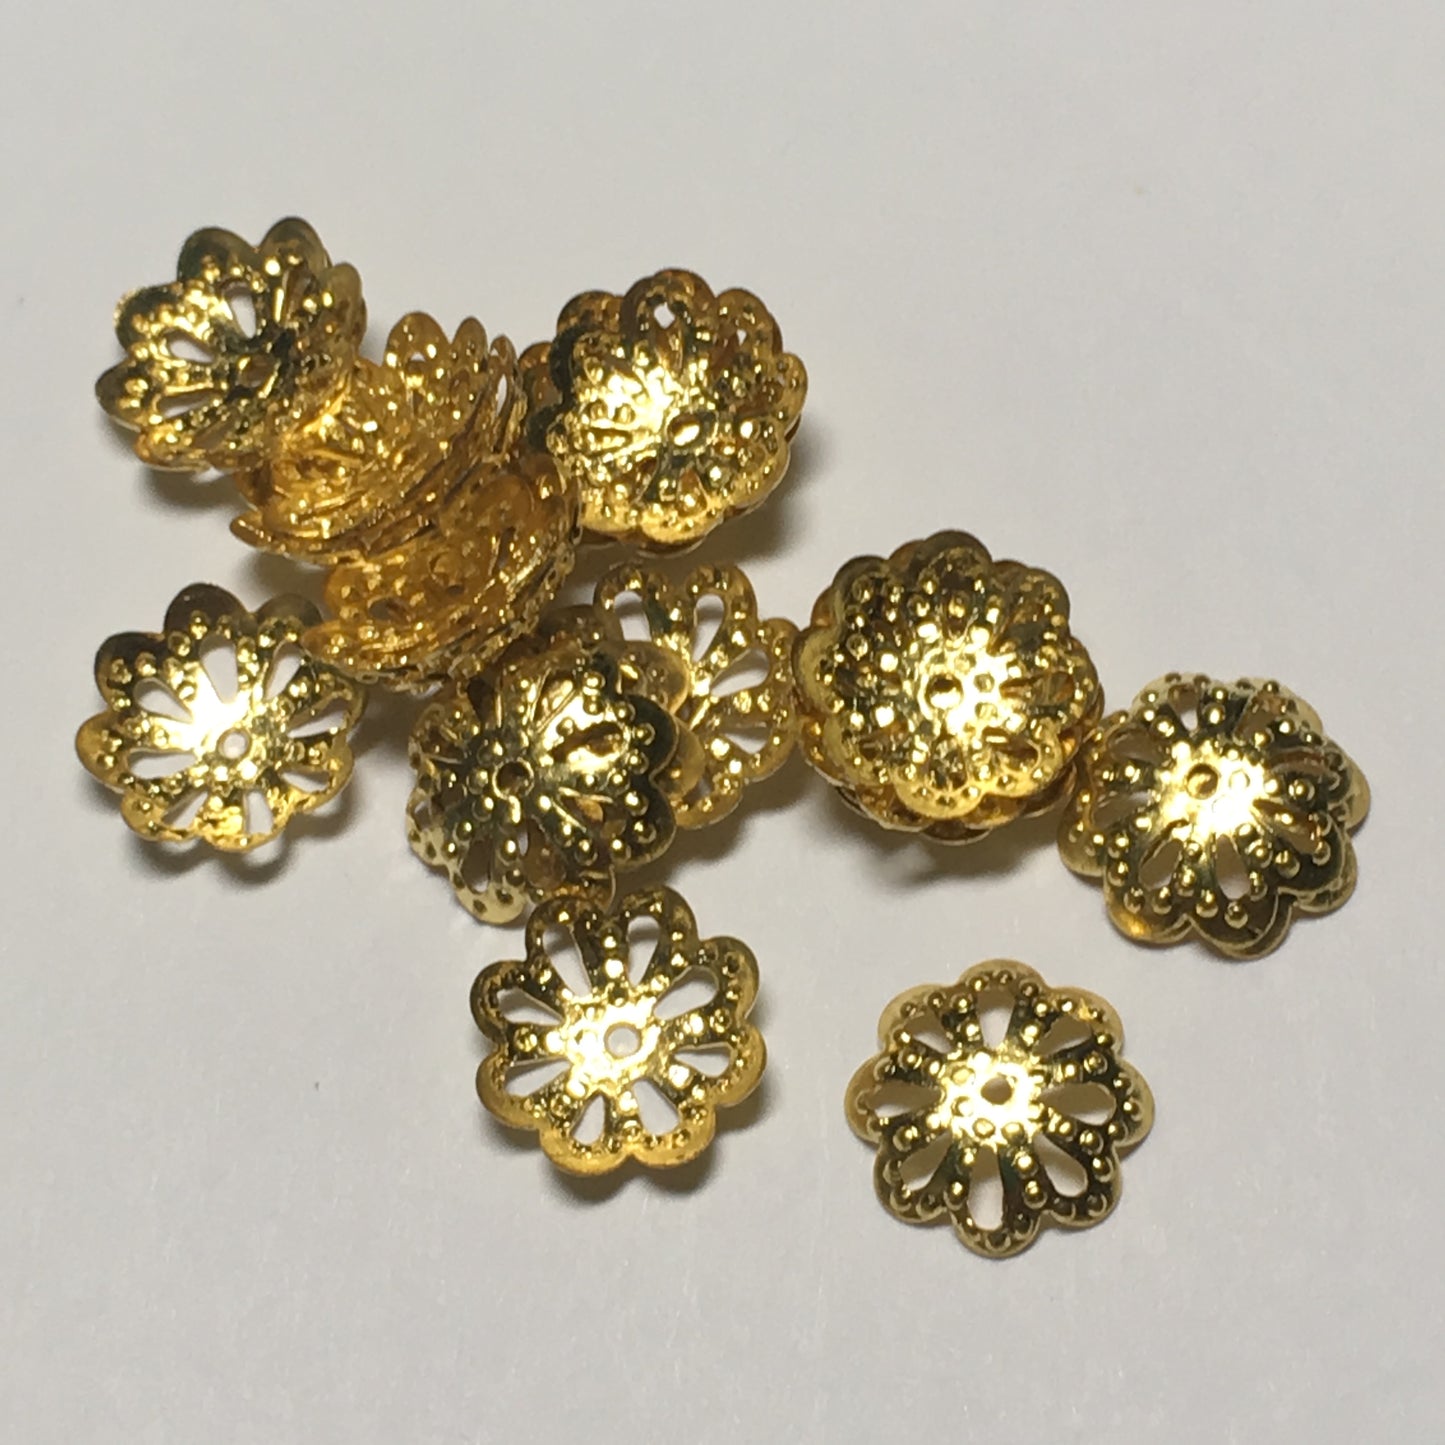 Gold Dotted Bead Caps, 10 mm  - 10 or 12 Caps